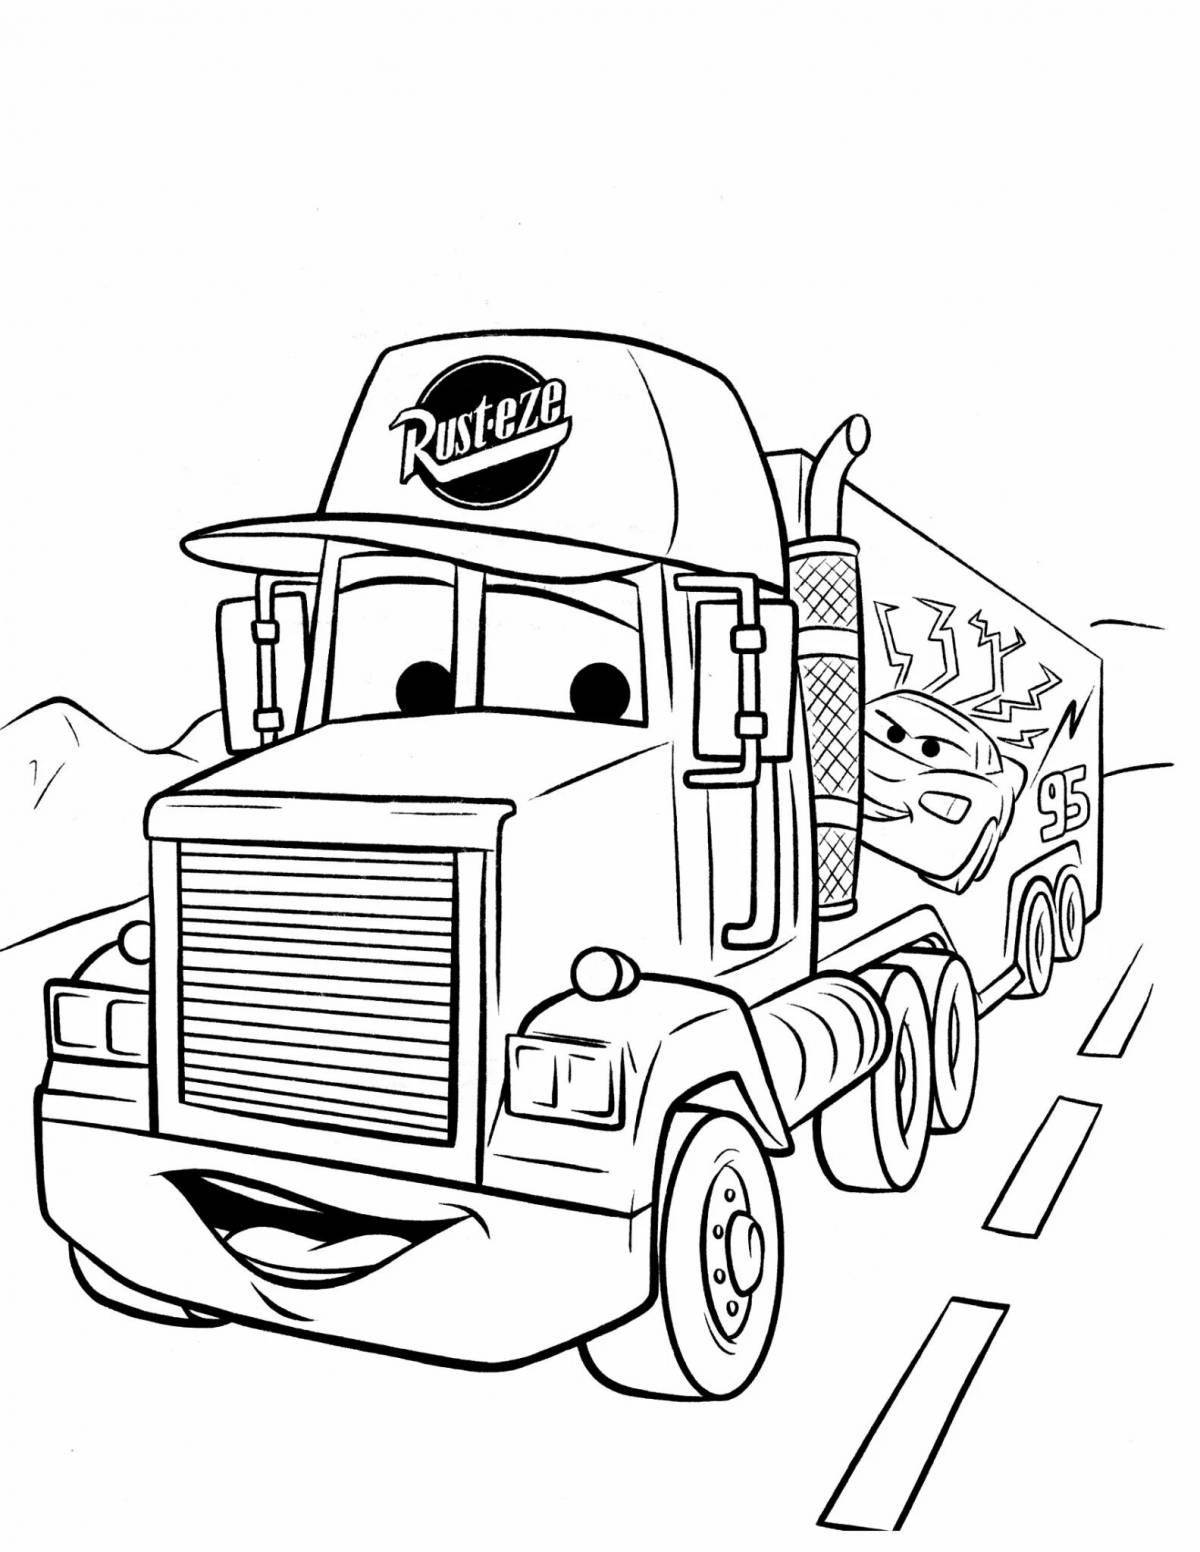 Coloring page dazzling poppy cars